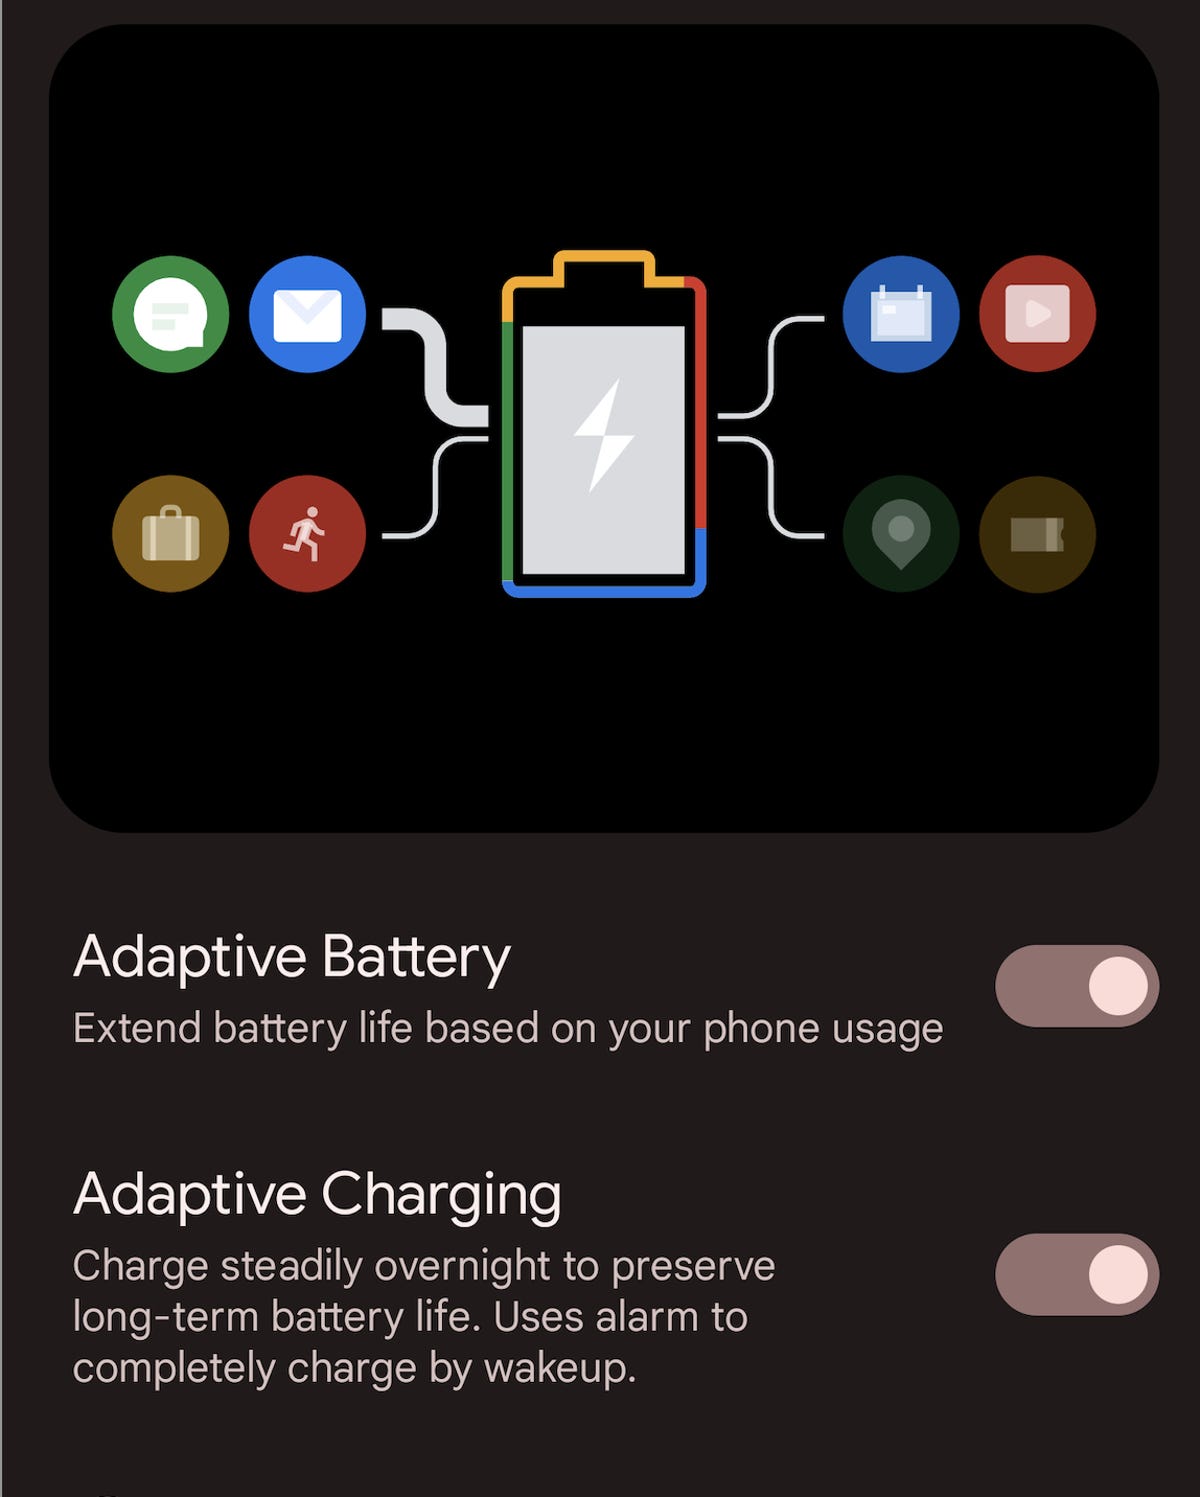 A screenshot showing the Pixel's adaptive battery and charging settings